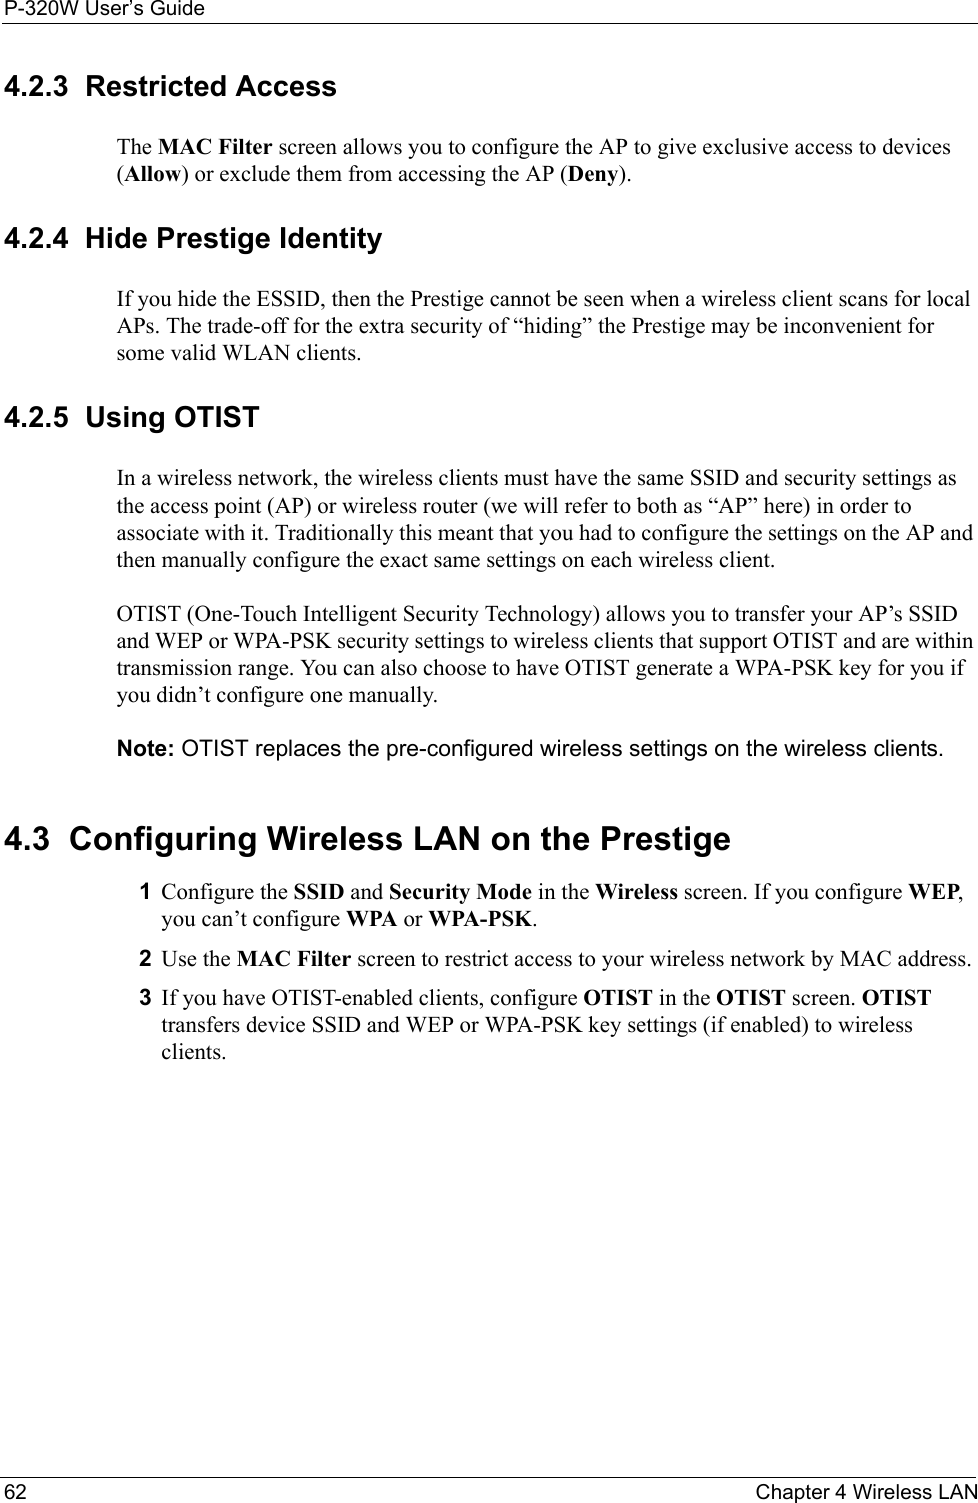 P-320W User’s Guide62  Chapter 4 Wireless LAN4.2.3  Restricted AccessThe MAC Filter screen allows you to configure the AP to give exclusive access to devices (Allow) or exclude them from accessing the AP (Deny). 4.2.4  Hide Prestige IdentityIf you hide the ESSID, then the Prestige cannot be seen when a wireless client scans for local APs. The trade-off for the extra security of “hiding” the Prestige may be inconvenient for some valid WLAN clients. 4.2.5  Using OTISTIn a wireless network, the wireless clients must have the same SSID and security settings as the access point (AP) or wireless router (we will refer to both as “AP” here) in order to associate with it. Traditionally this meant that you had to configure the settings on the AP and then manually configure the exact same settings on each wireless client.OTIST (One-Touch Intelligent Security Technology) allows you to transfer your AP’s SSID and WEP or WPA-PSK security settings to wireless clients that support OTIST and are within transmission range. You can also choose to have OTIST generate a WPA-PSK key for you if you didn’t configure one manually.Note: OTIST replaces the pre-configured wireless settings on the wireless clients.4.3  Configuring Wireless LAN on the Prestige1Configure the SSID and Security Mode in the Wireless screen. If you configure WEP, you can’t configure WPA or WPA-PSK. 2Use the MAC Filter screen to restrict access to your wireless network by MAC address. 3If you have OTIST-enabled clients, configure OTIST in the OTIST screen. OTIST transfers device SSID and WEP or WPA-PSK key settings (if enabled) to wireless clients.